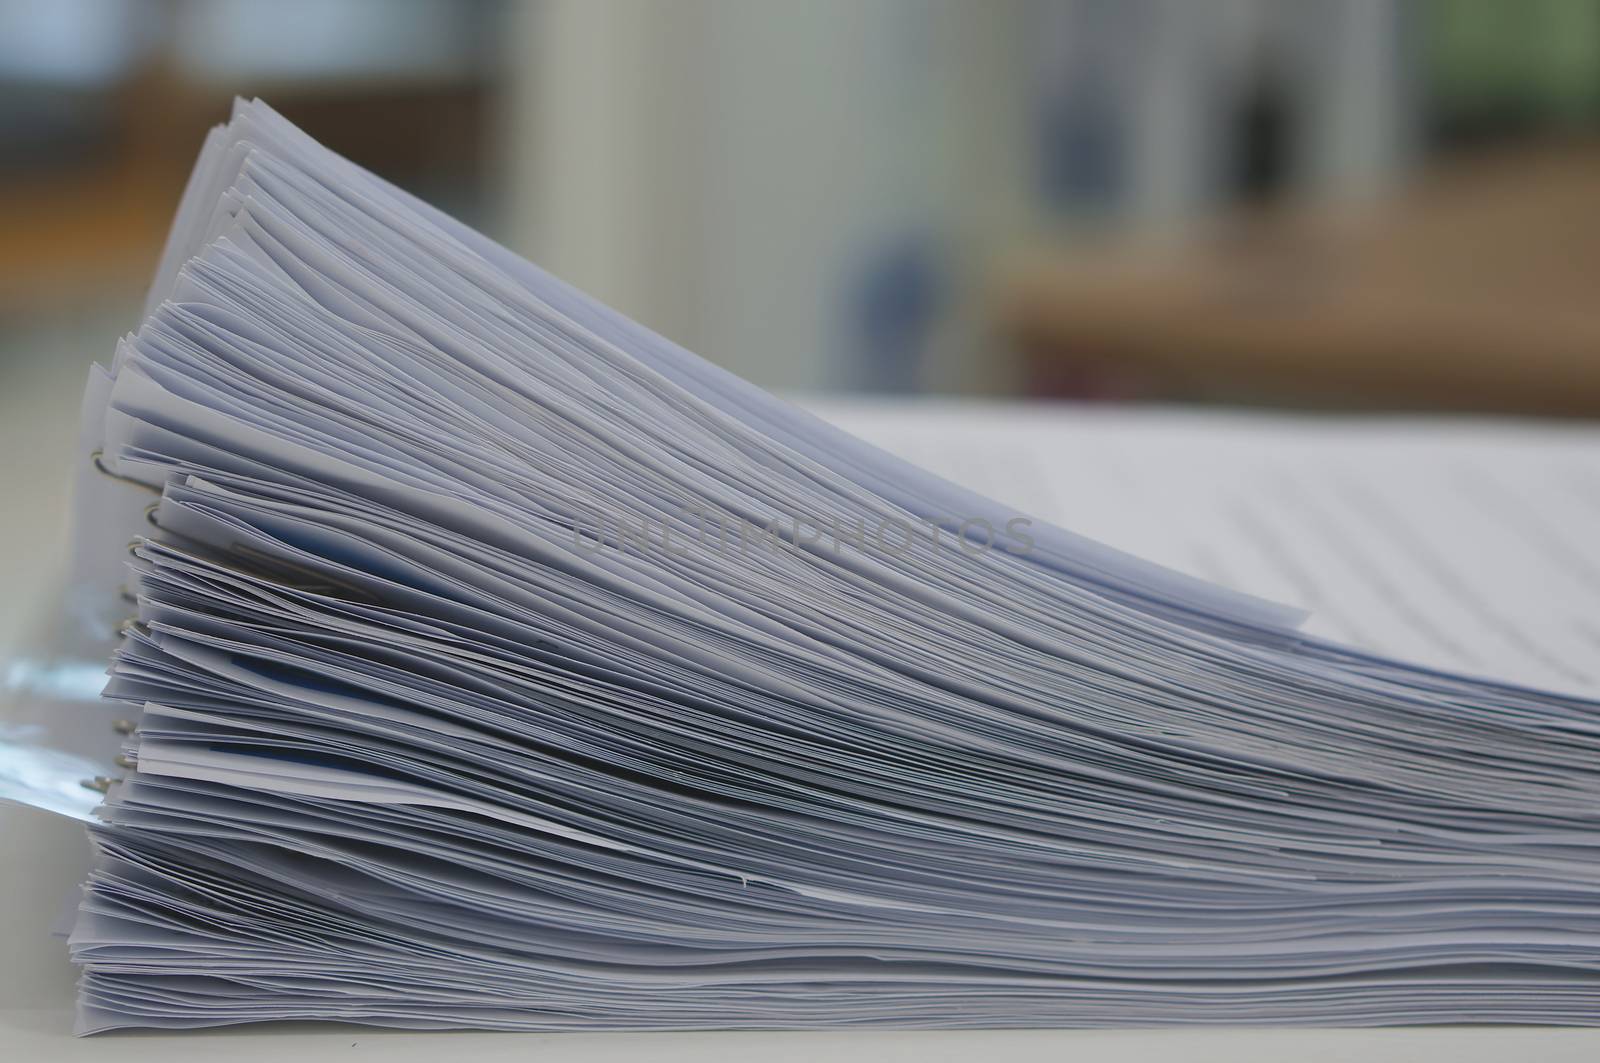 Stack of many  document organized by clipping placed on desk in office.